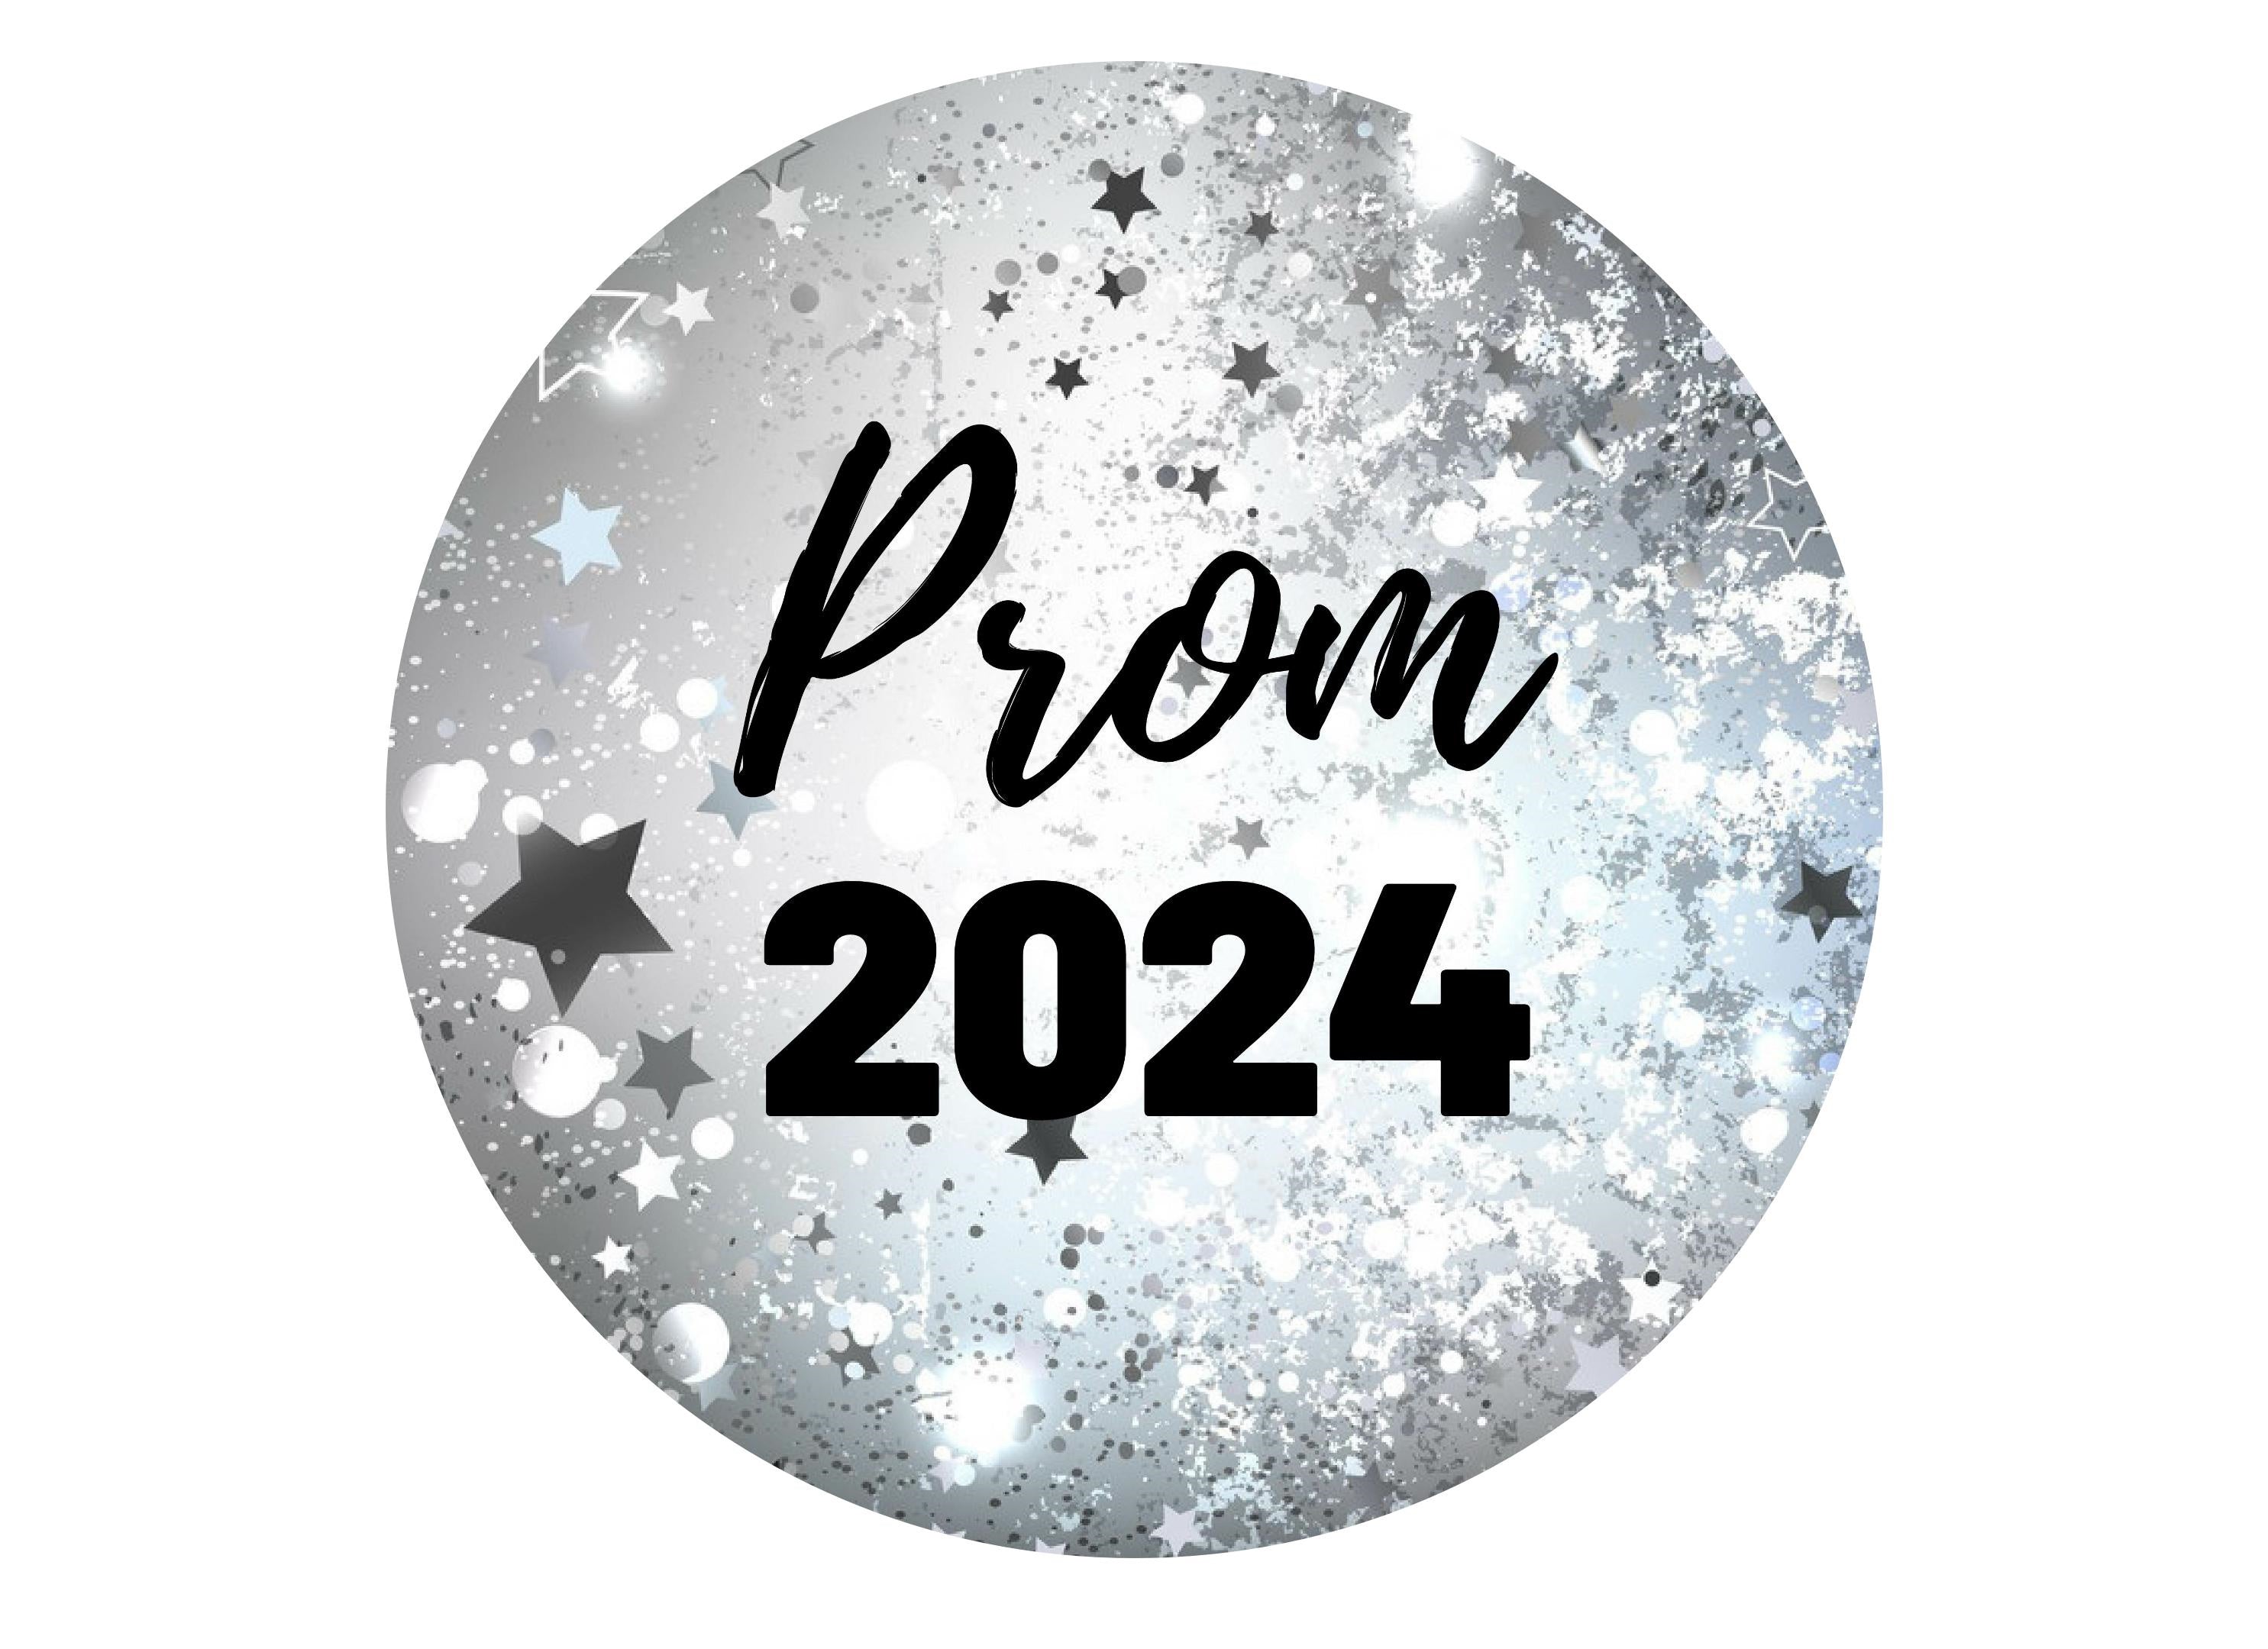 Prom 2024 large edible cake topper